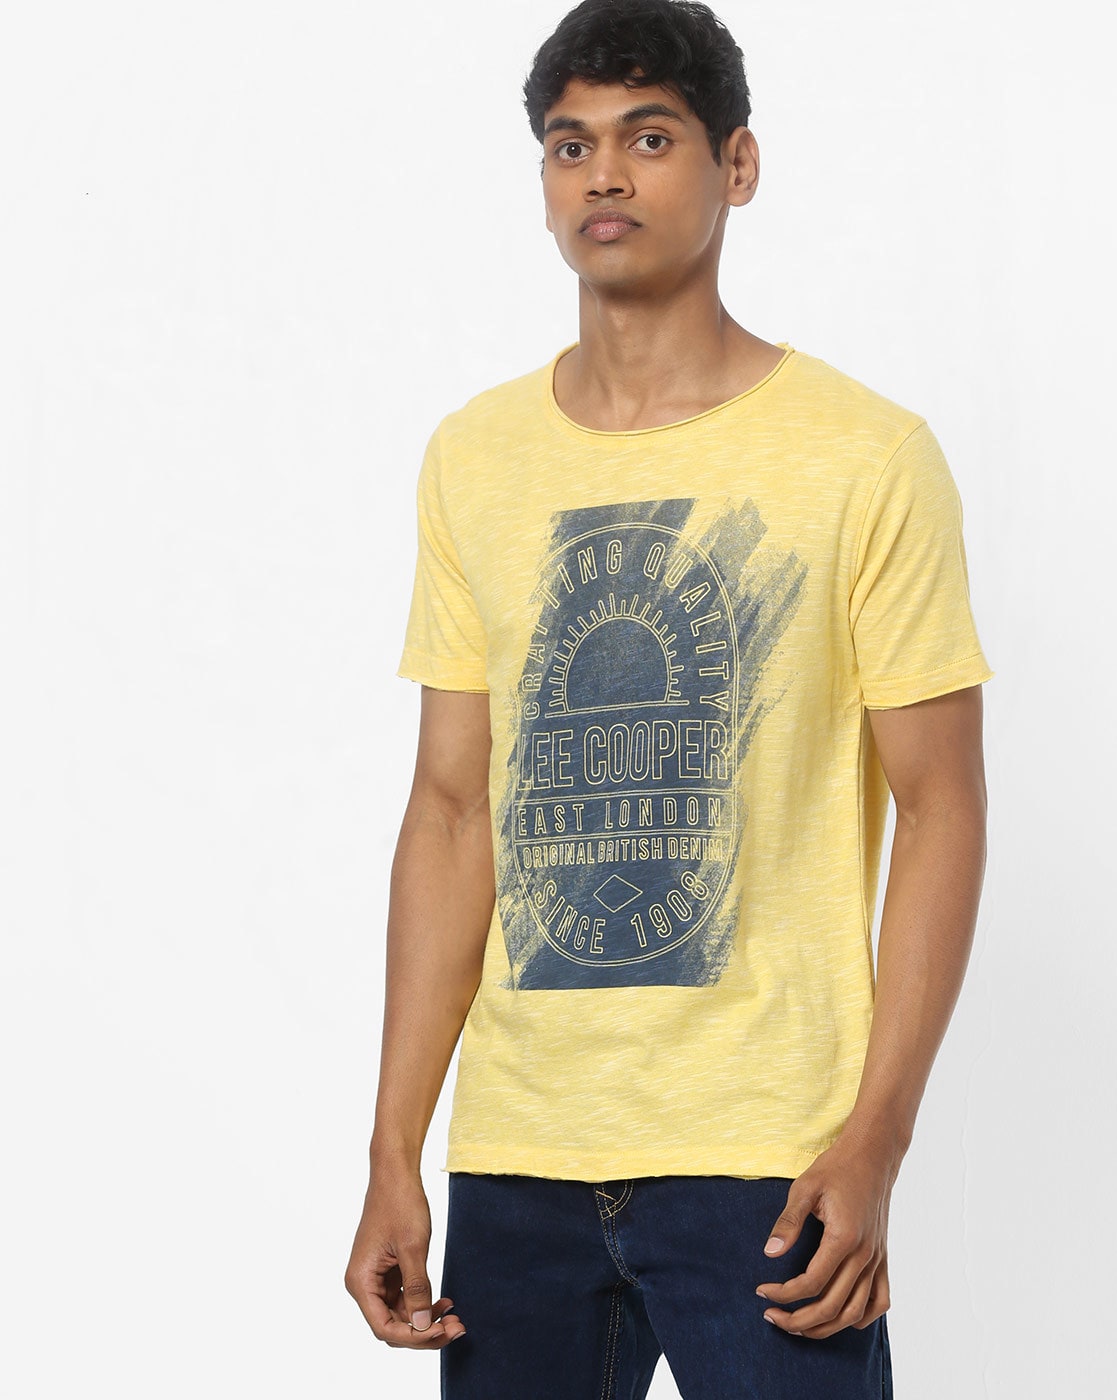 lee t shirts online india